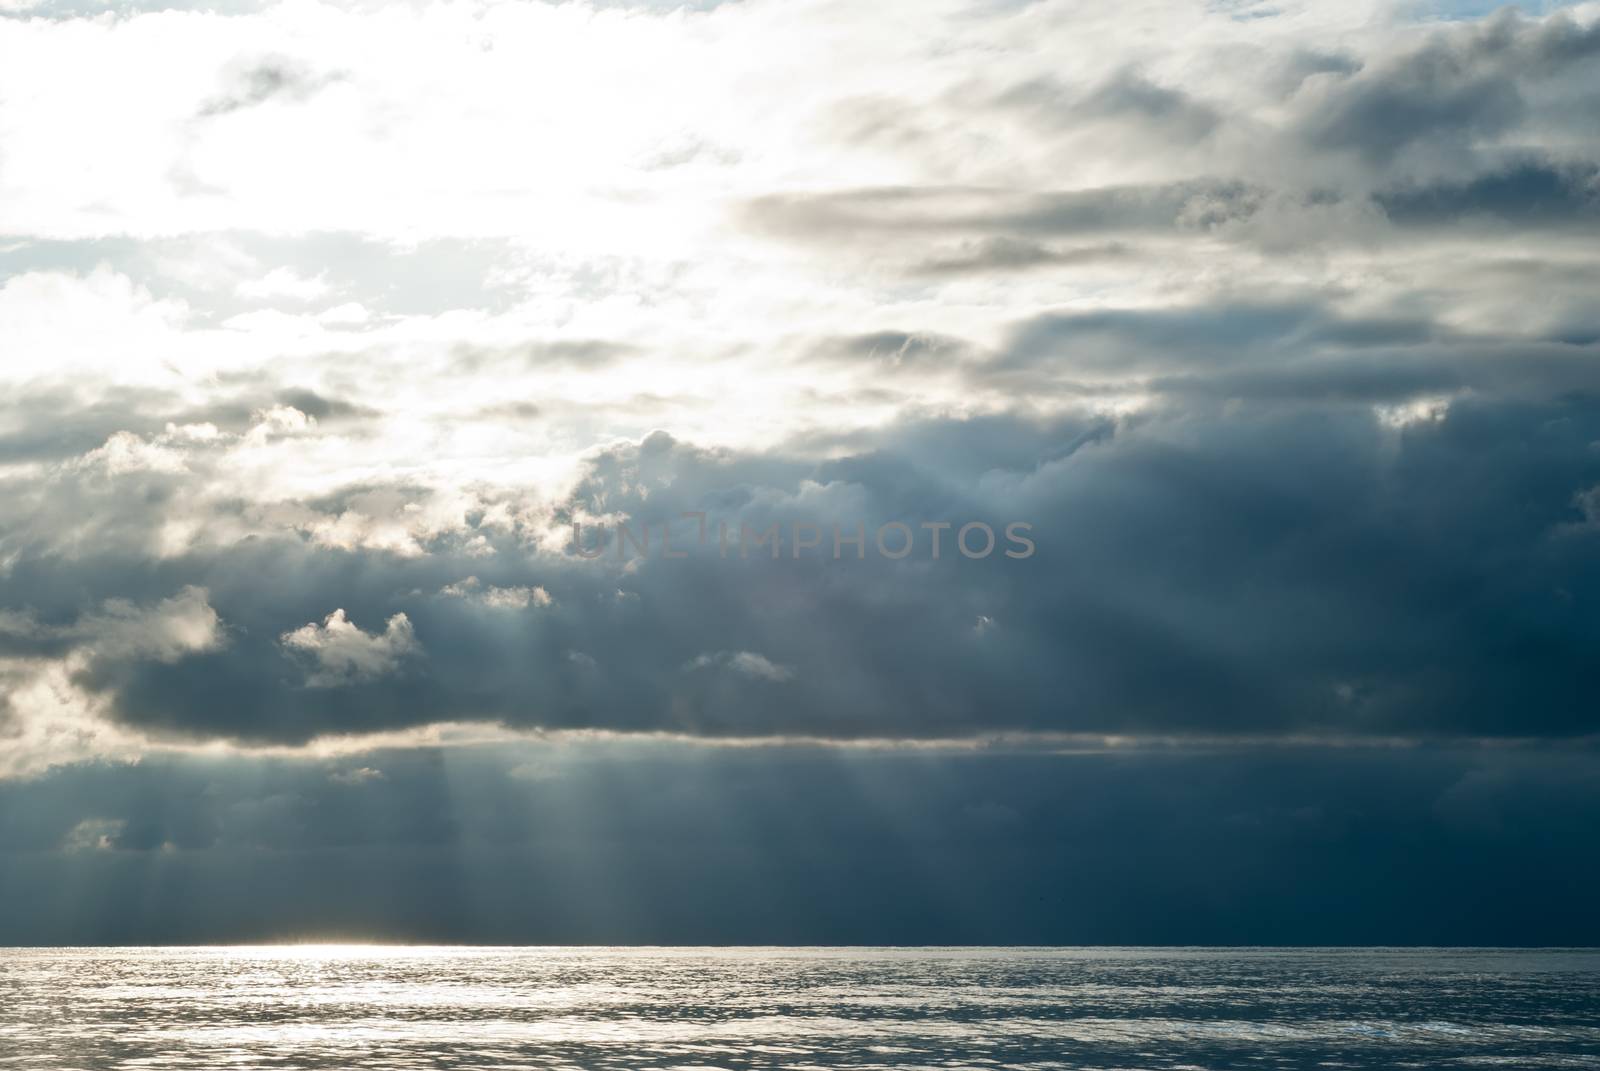 The sun's rays passing through the storm clouds over the sea